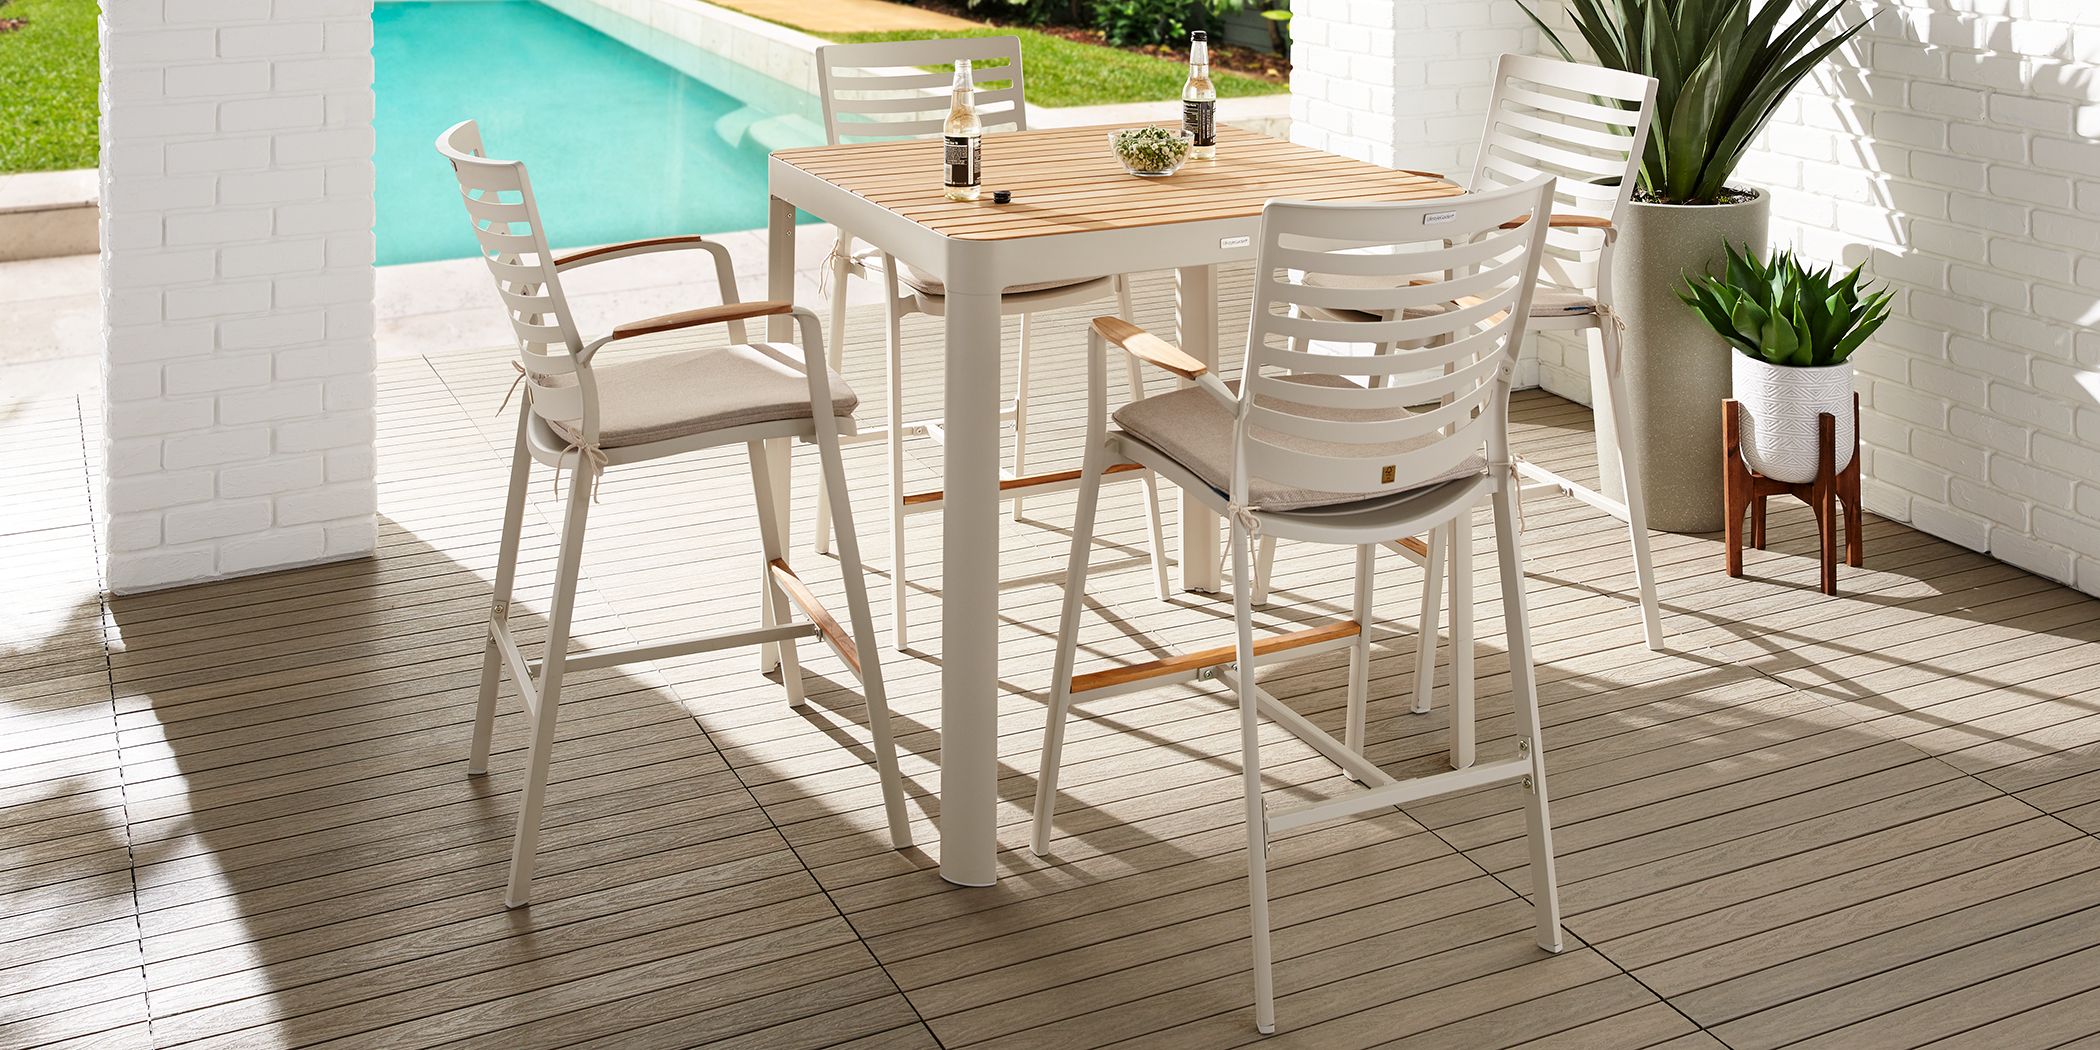 5 Piece Dining Room Kitchen Table, Tkc Fairmont 7 Piece Counter Height Outdoor Dining Table And Chairs